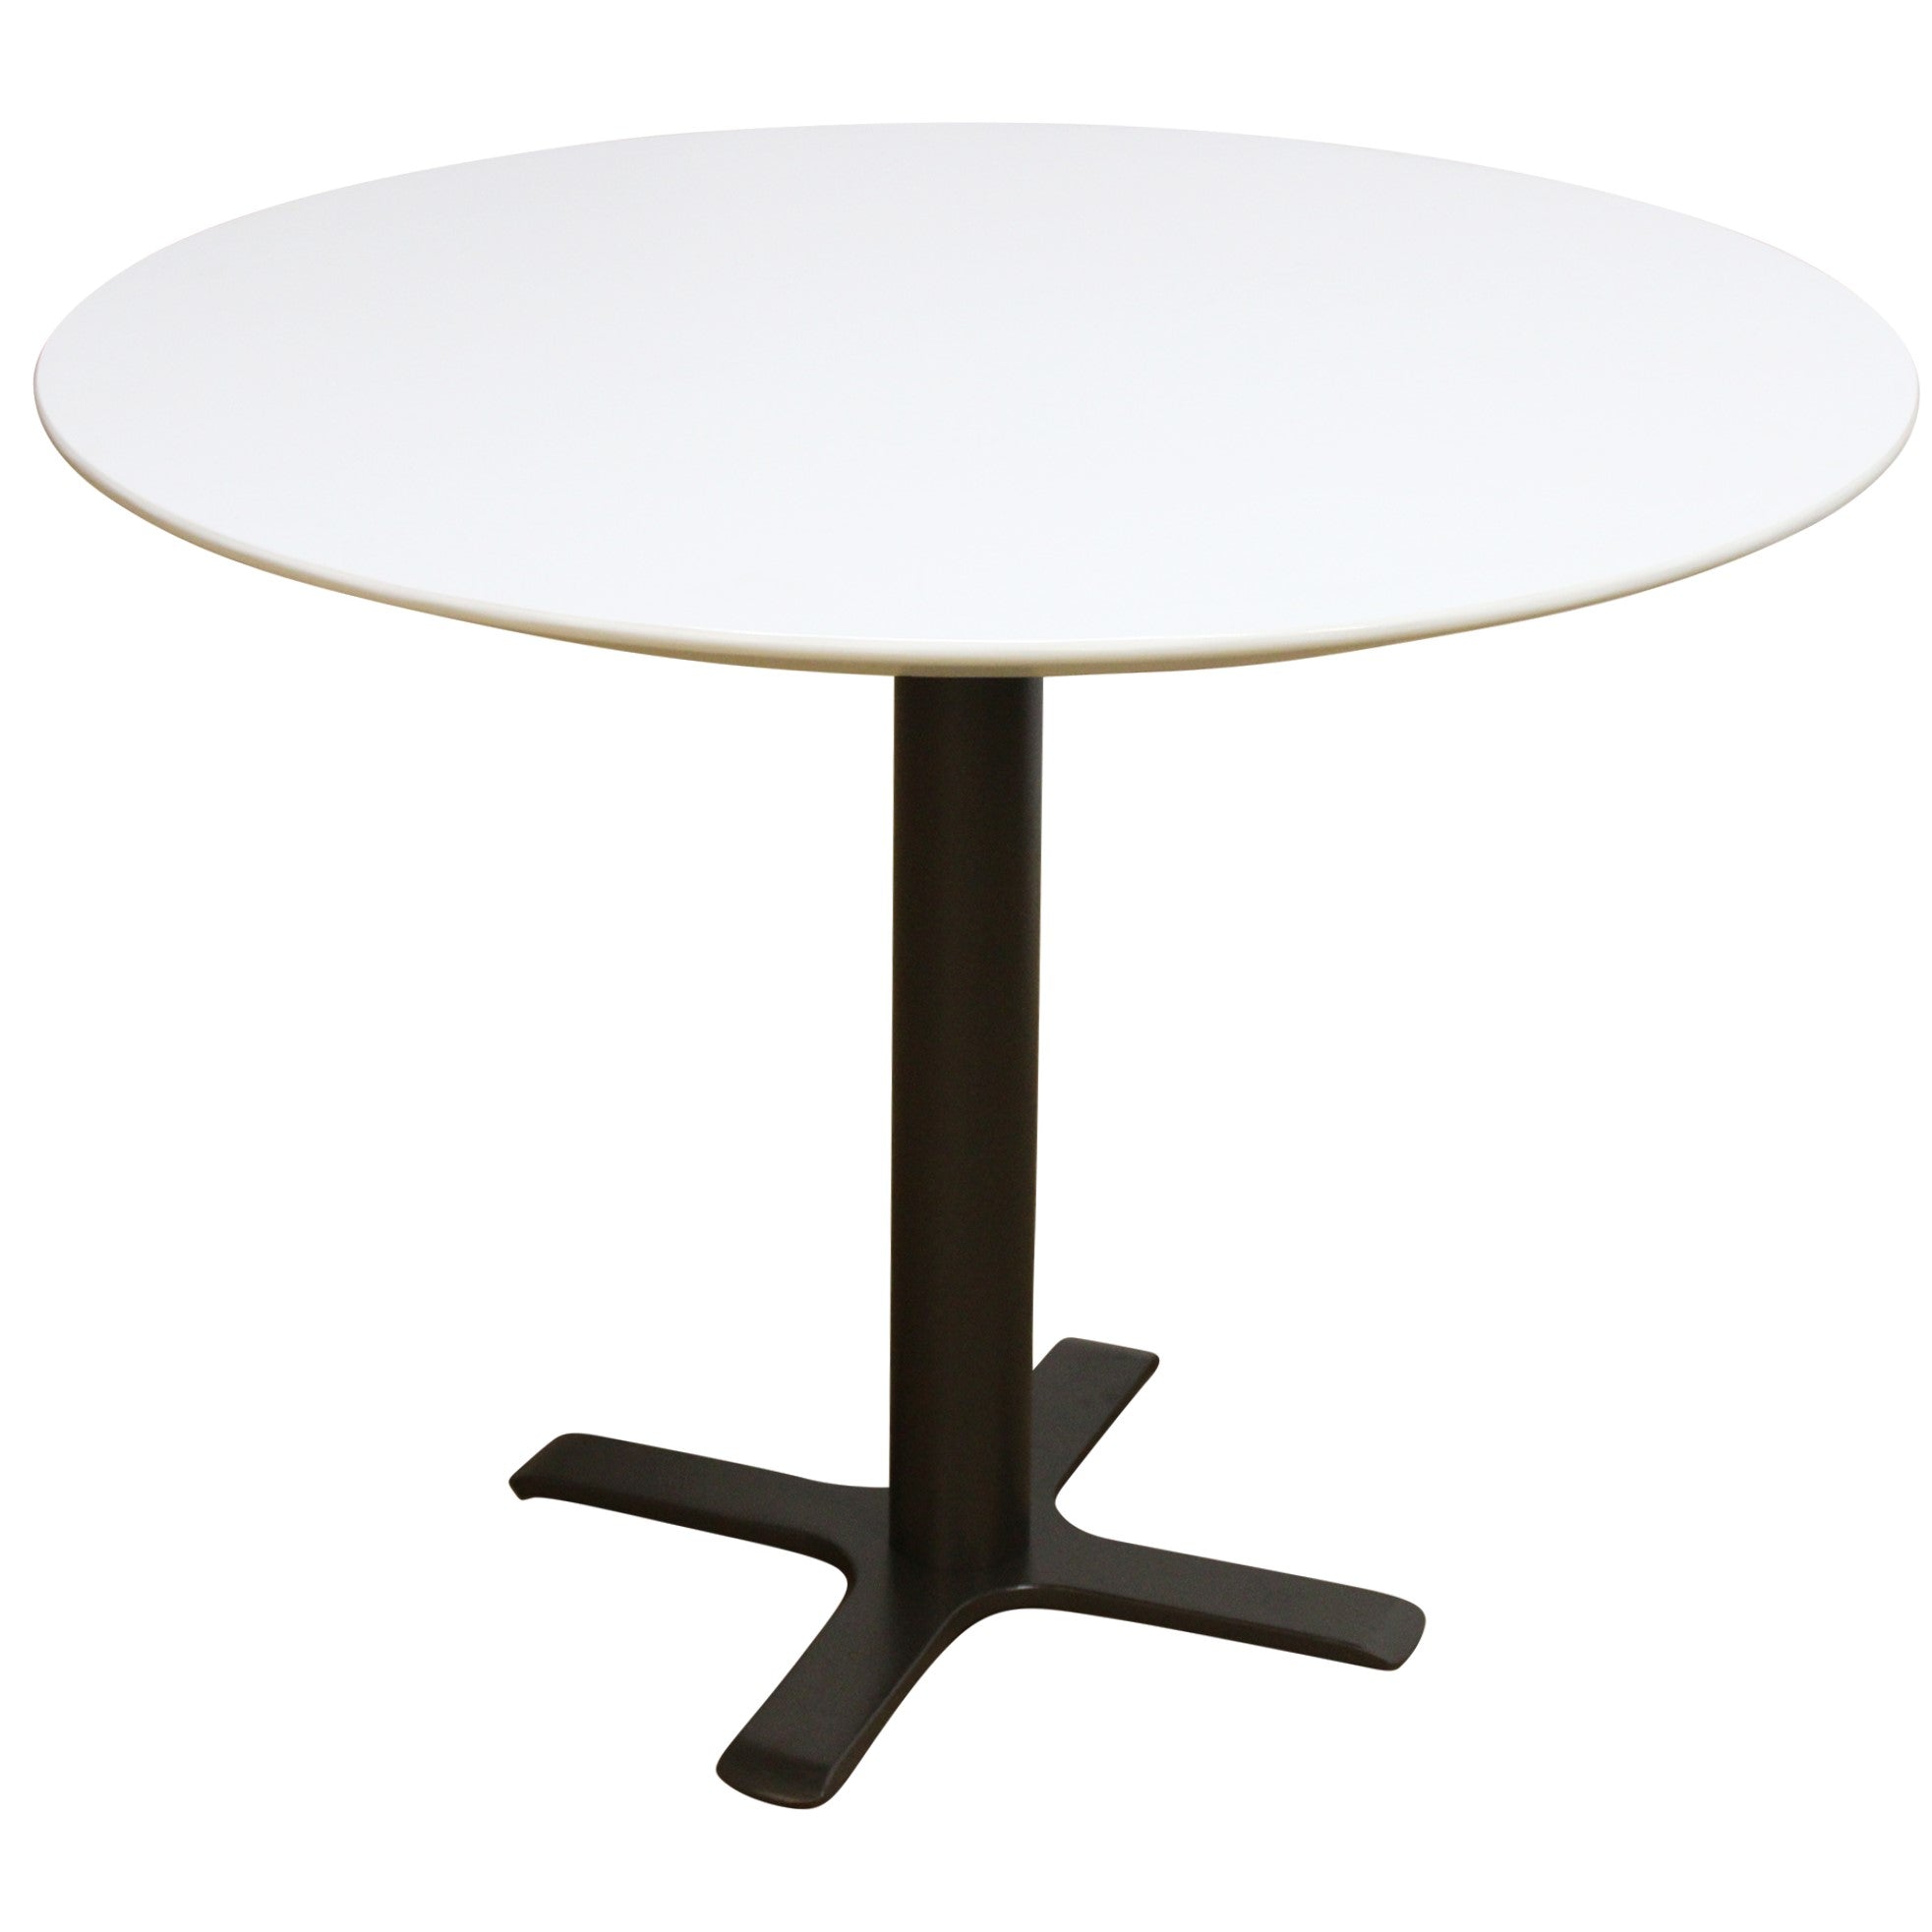 Shelby Williams Cafe Table - Preowned